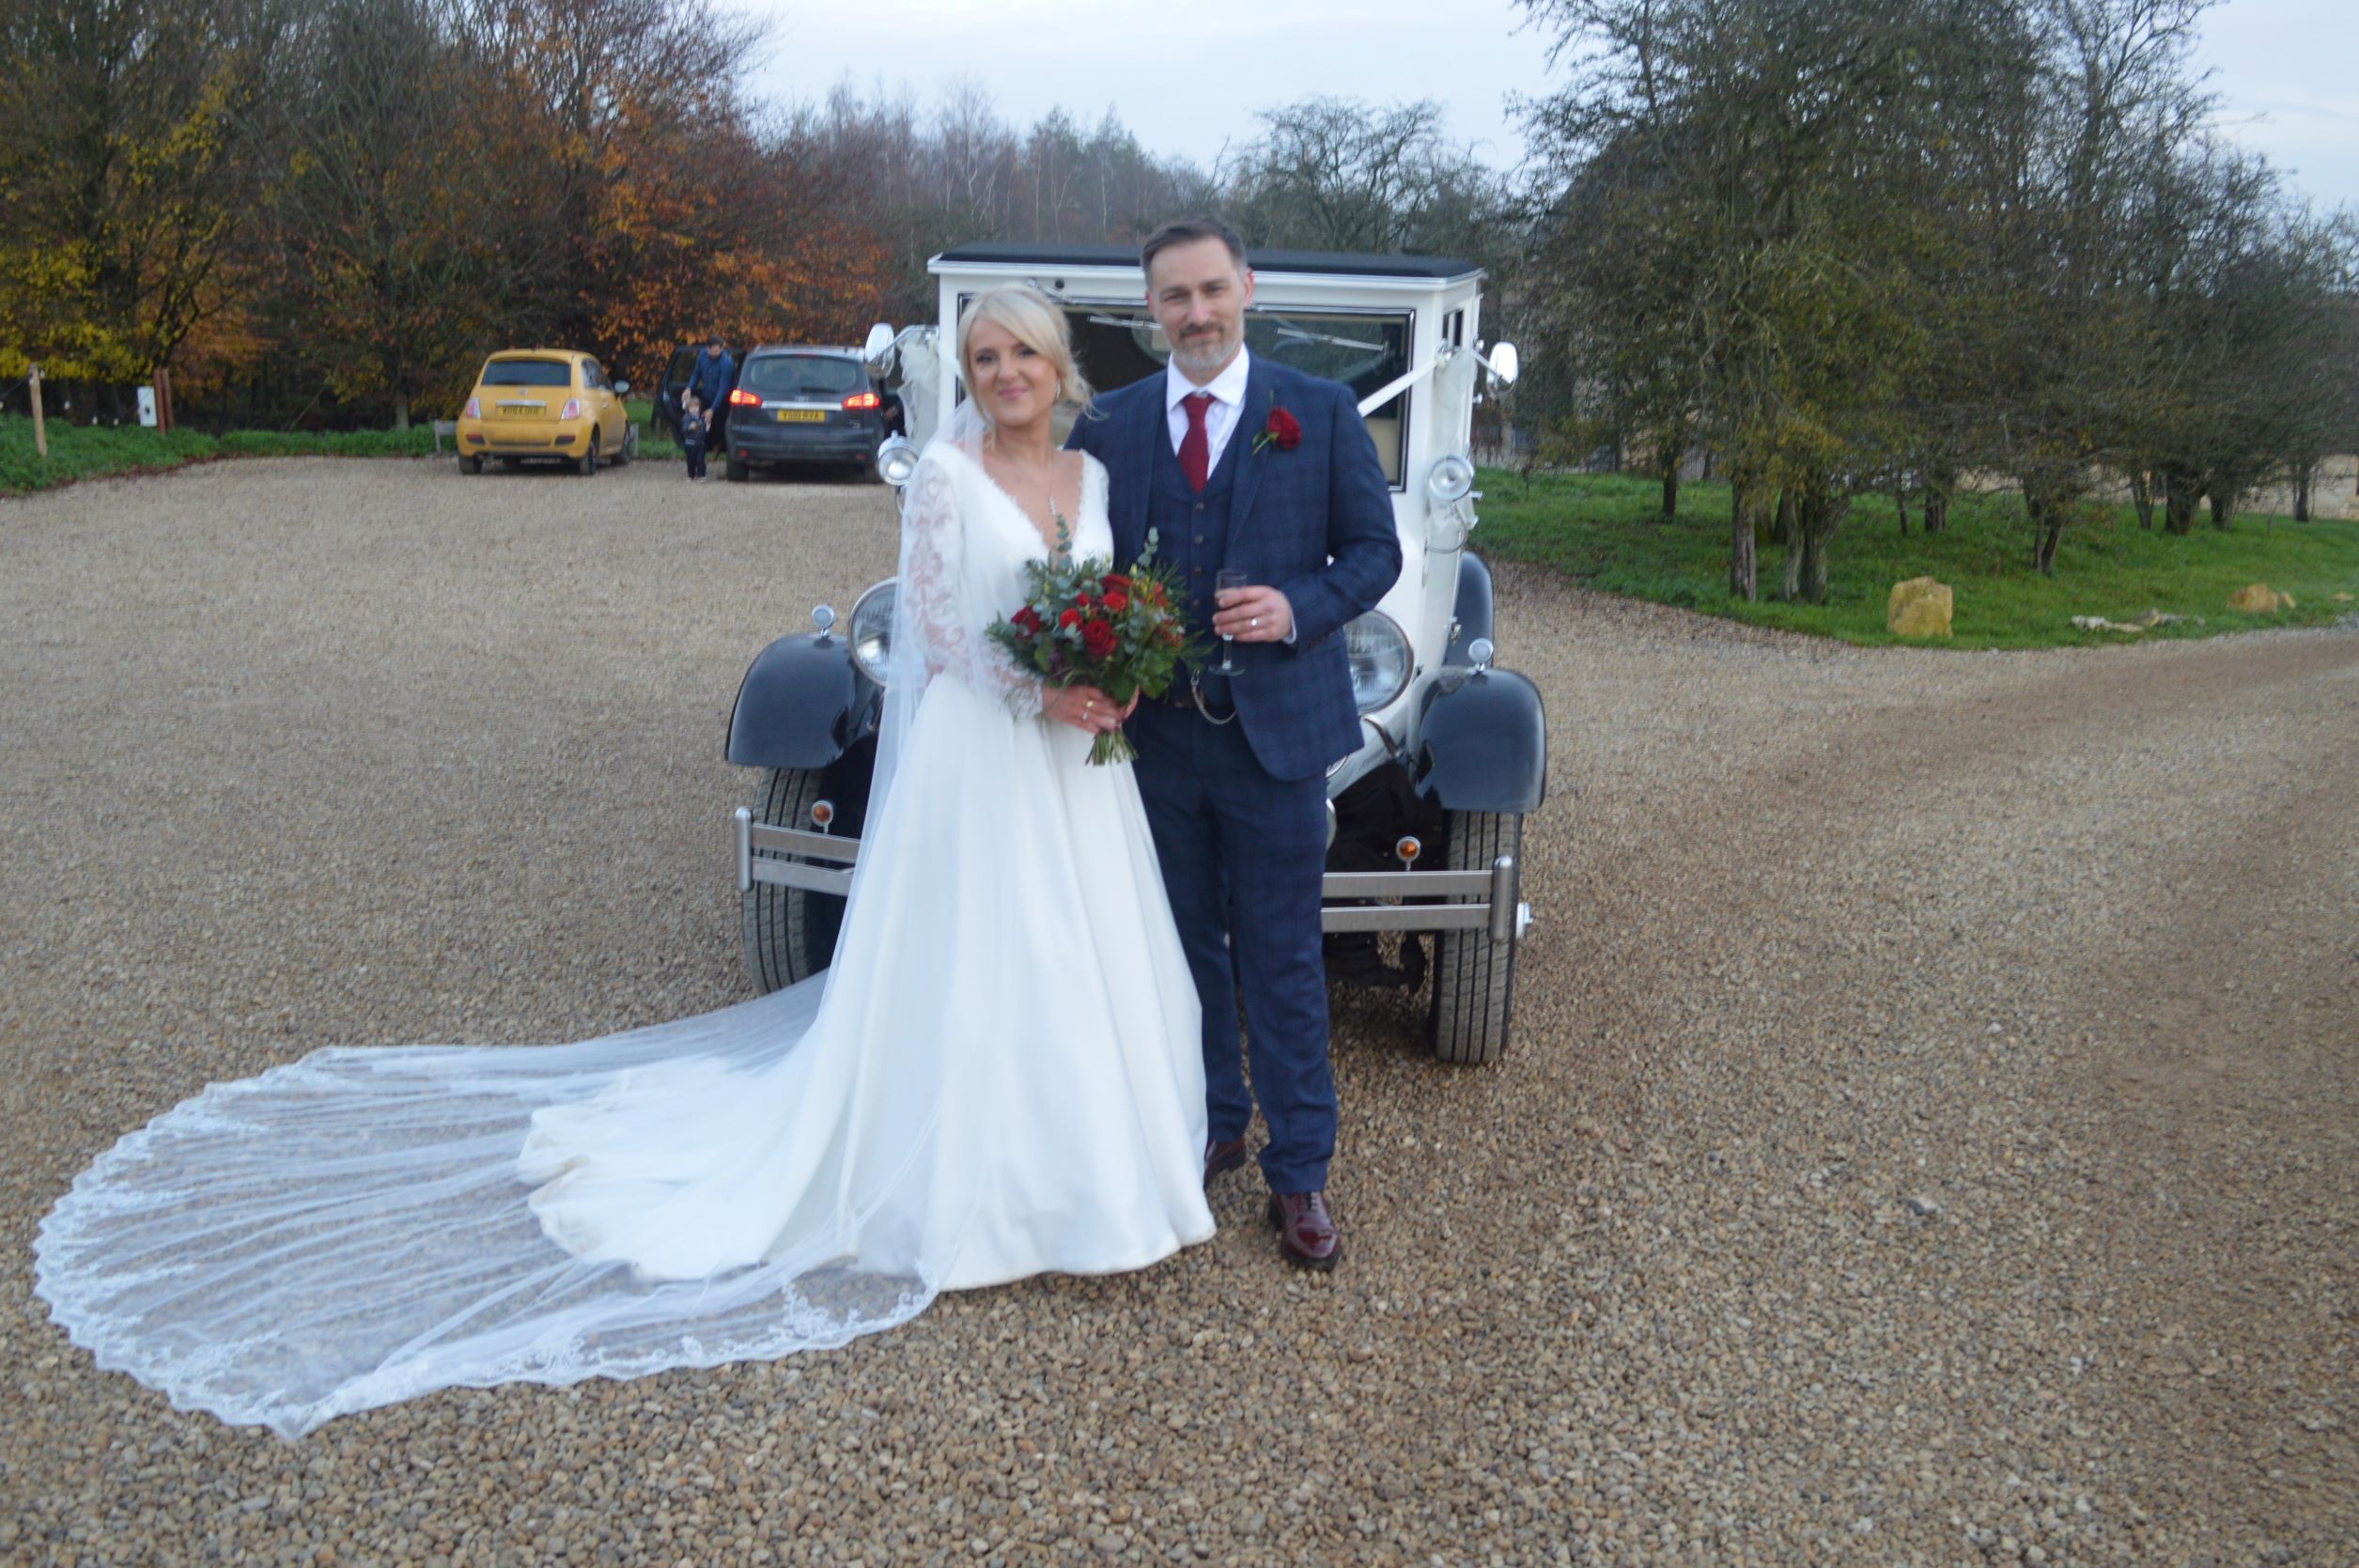 Old Gore Barn, Calmsden, wedding for Louise and Christopher Friday 2 December 2022